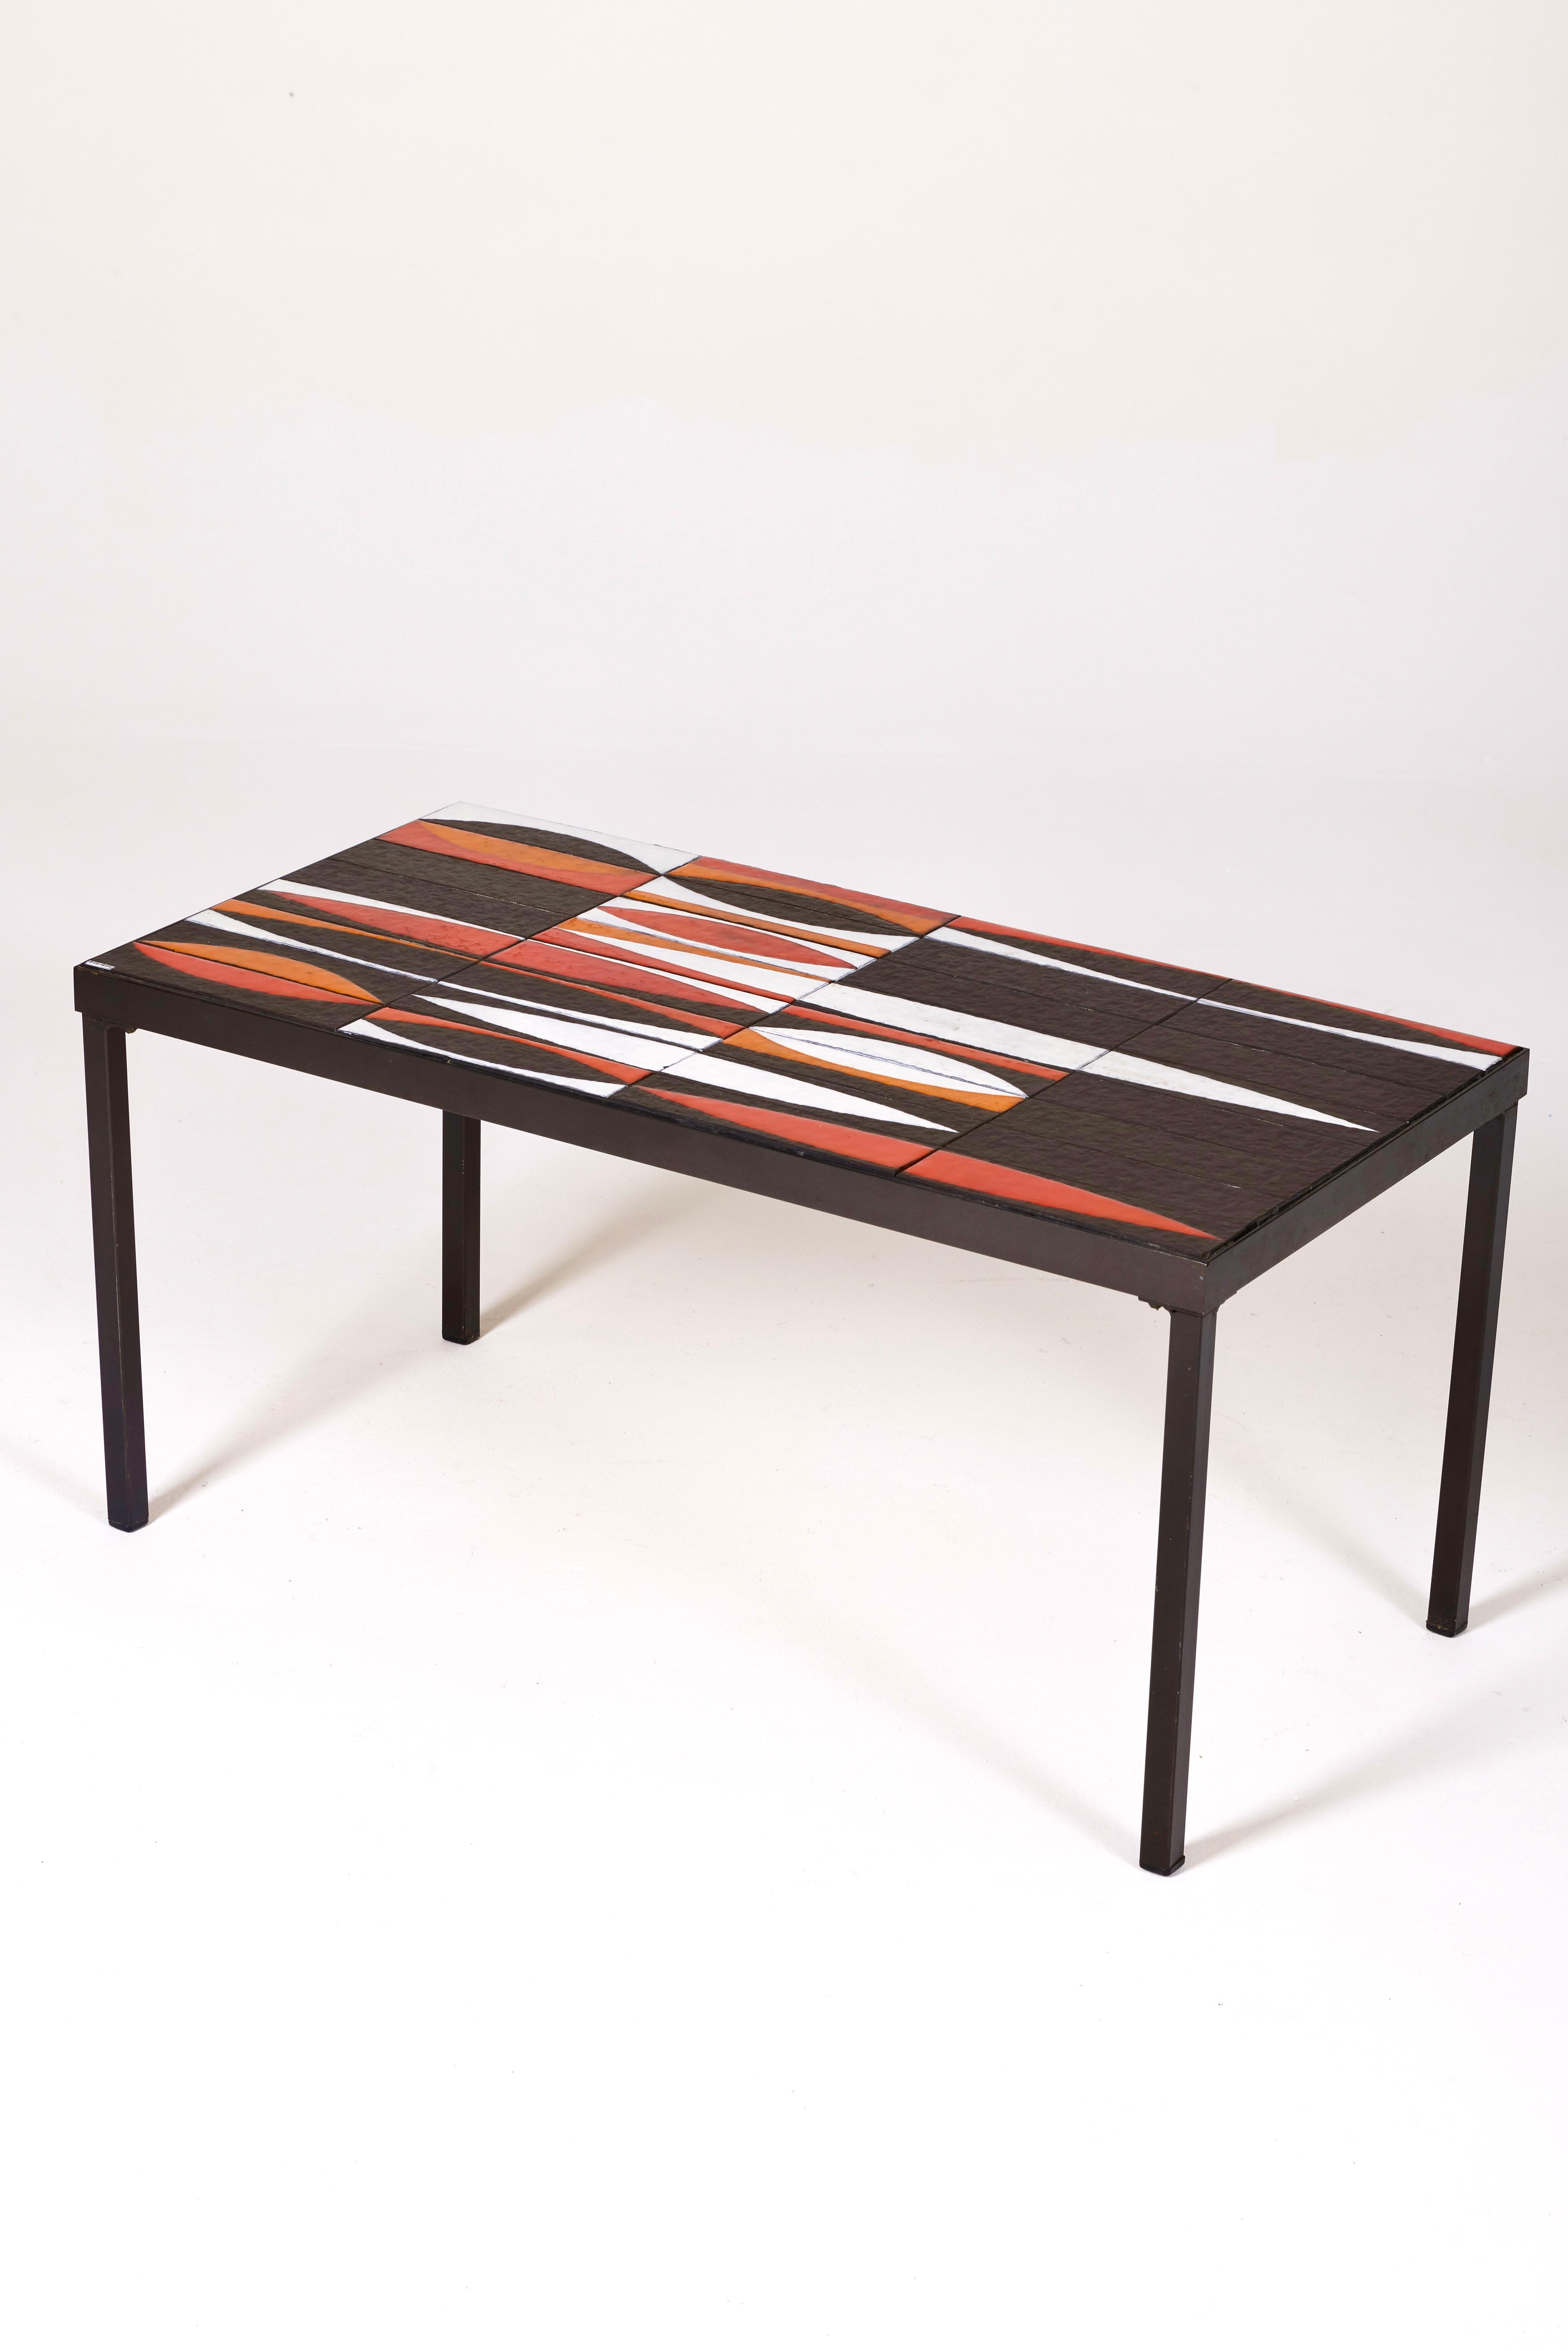 Ceramic coffee table, Navette model by the ceramist Roger Capron, from the 1960s. The structure is black lacquered metal, and the tabletop is made of yellow, green, and brown glazed ceramic. The table is signed.

LP1348